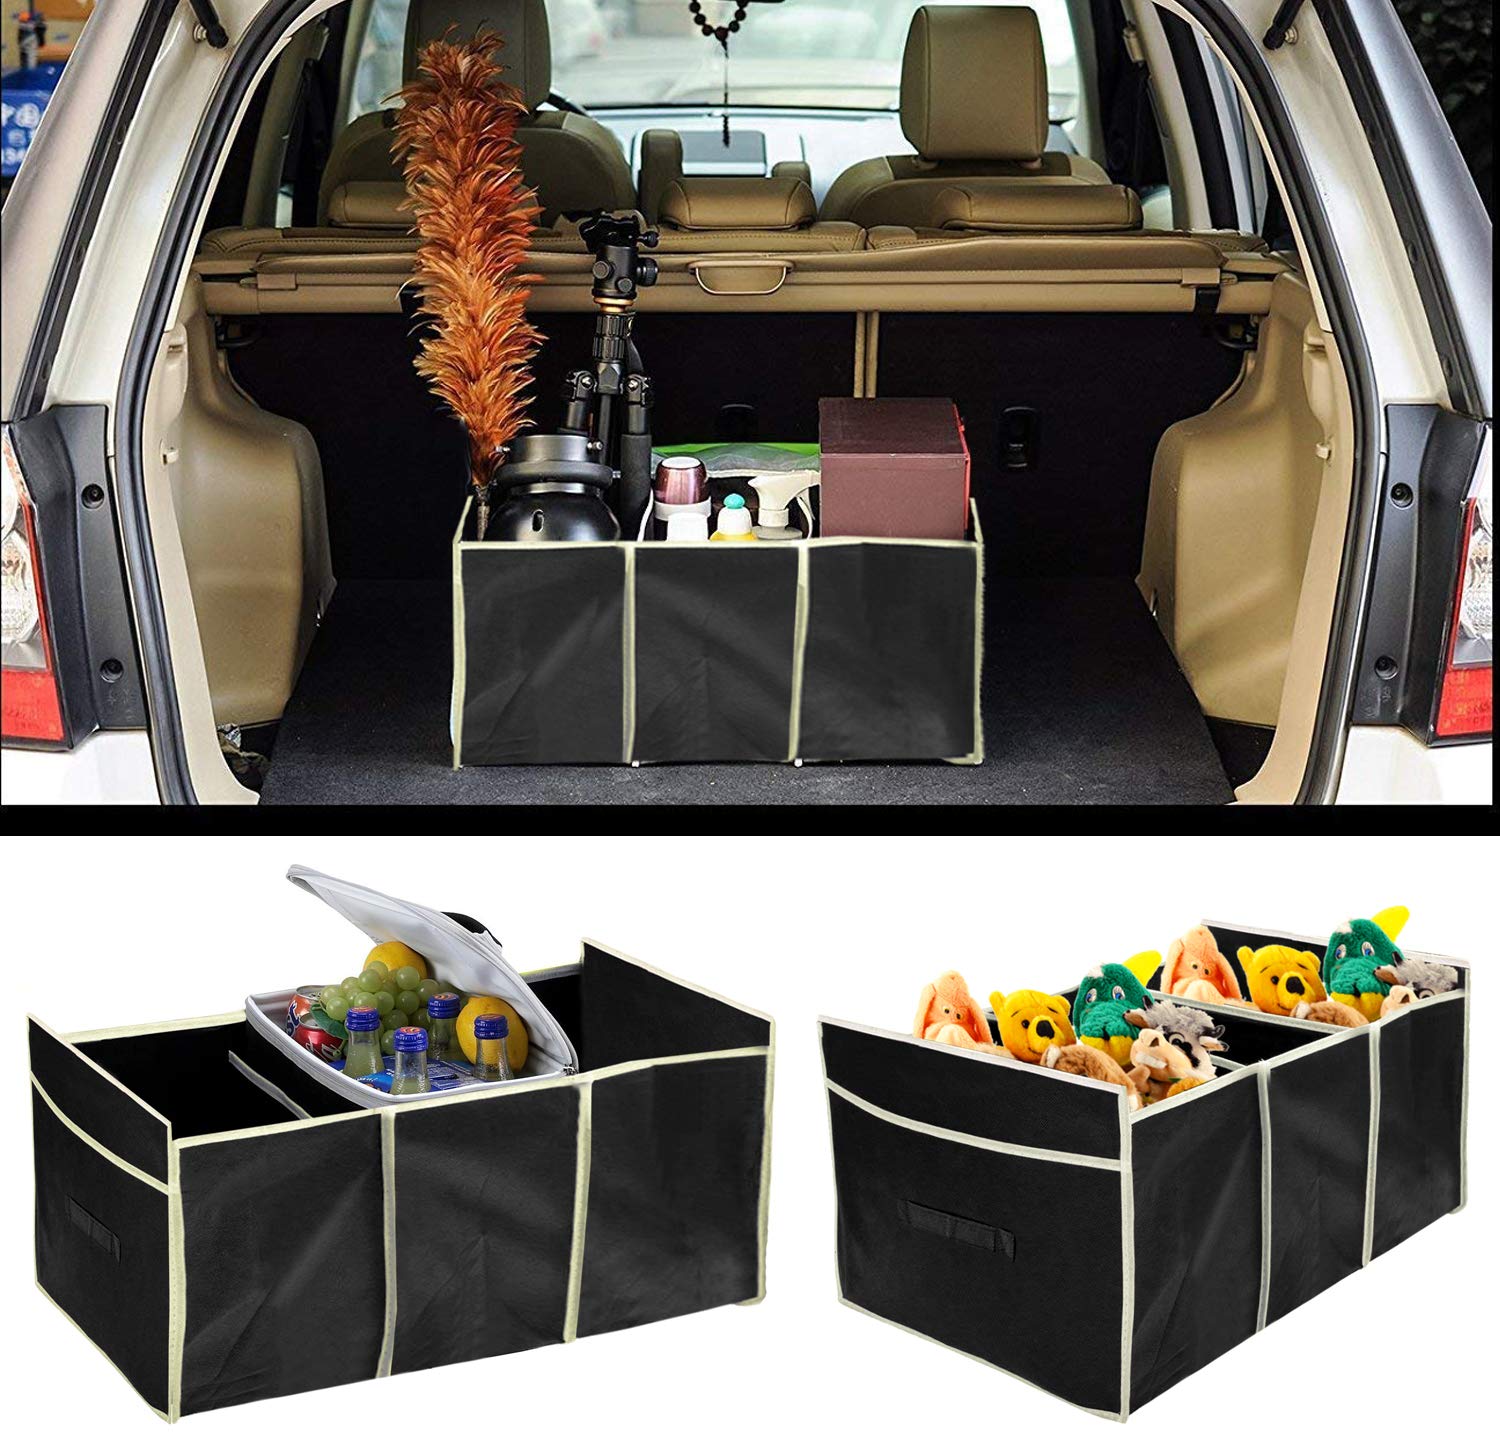 Kuber Industries Foldable Trunk Storage Organizer, Reinforced Handles, Suitable for Any Car, SUV, Mini-Van- Pack of 2 (Black)